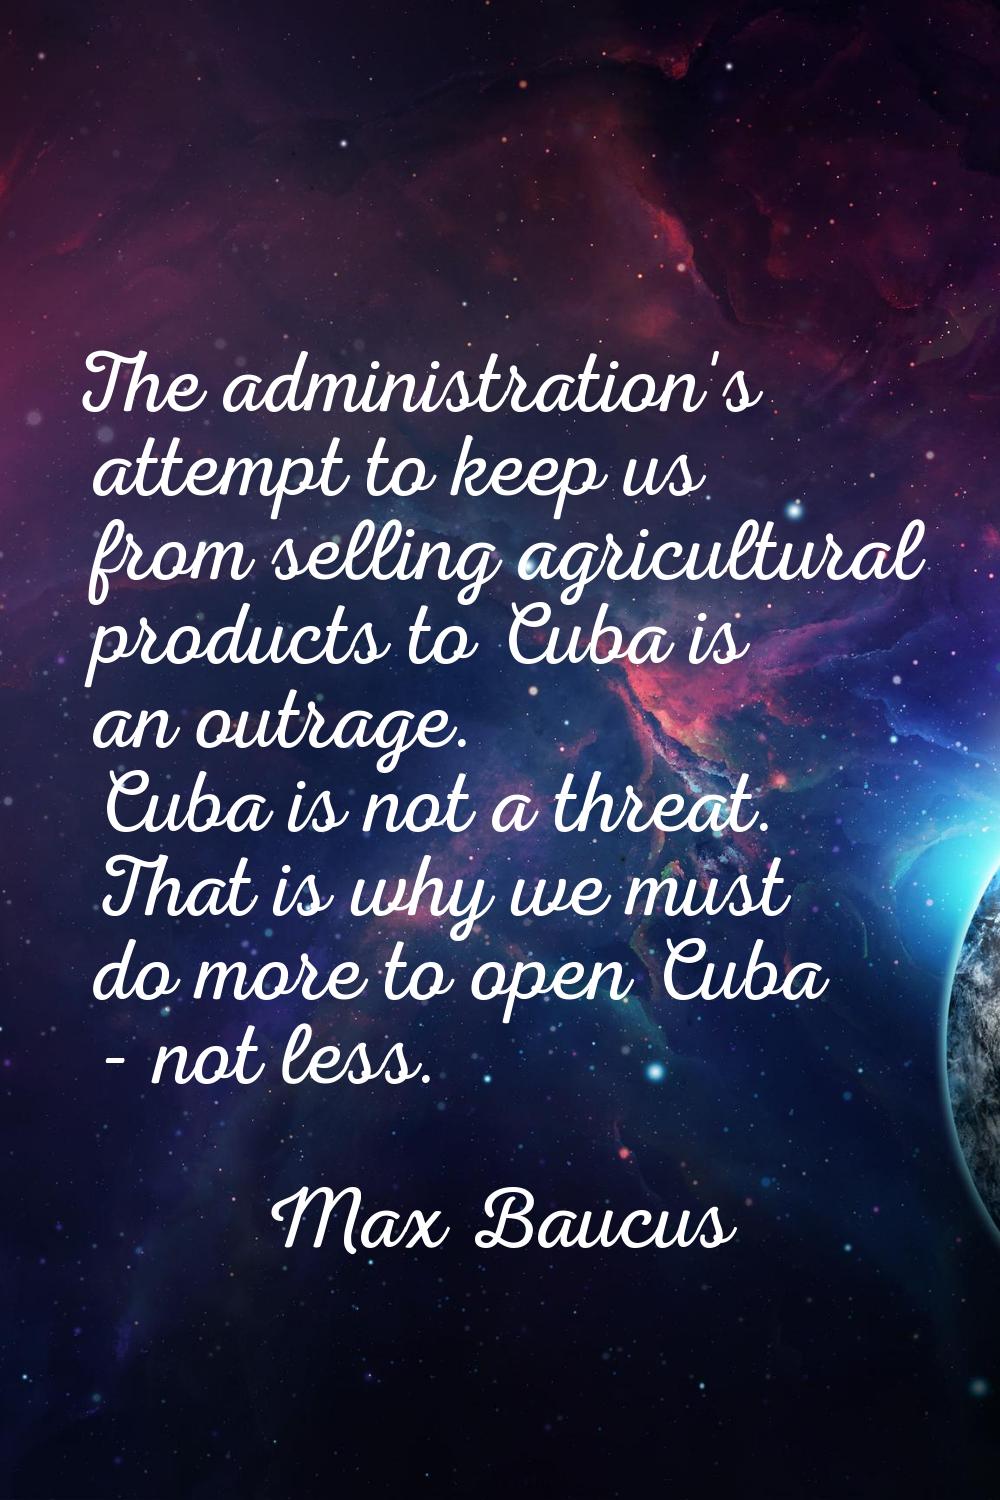 The administration's attempt to keep us from selling agricultural products to Cuba is an outrage. C